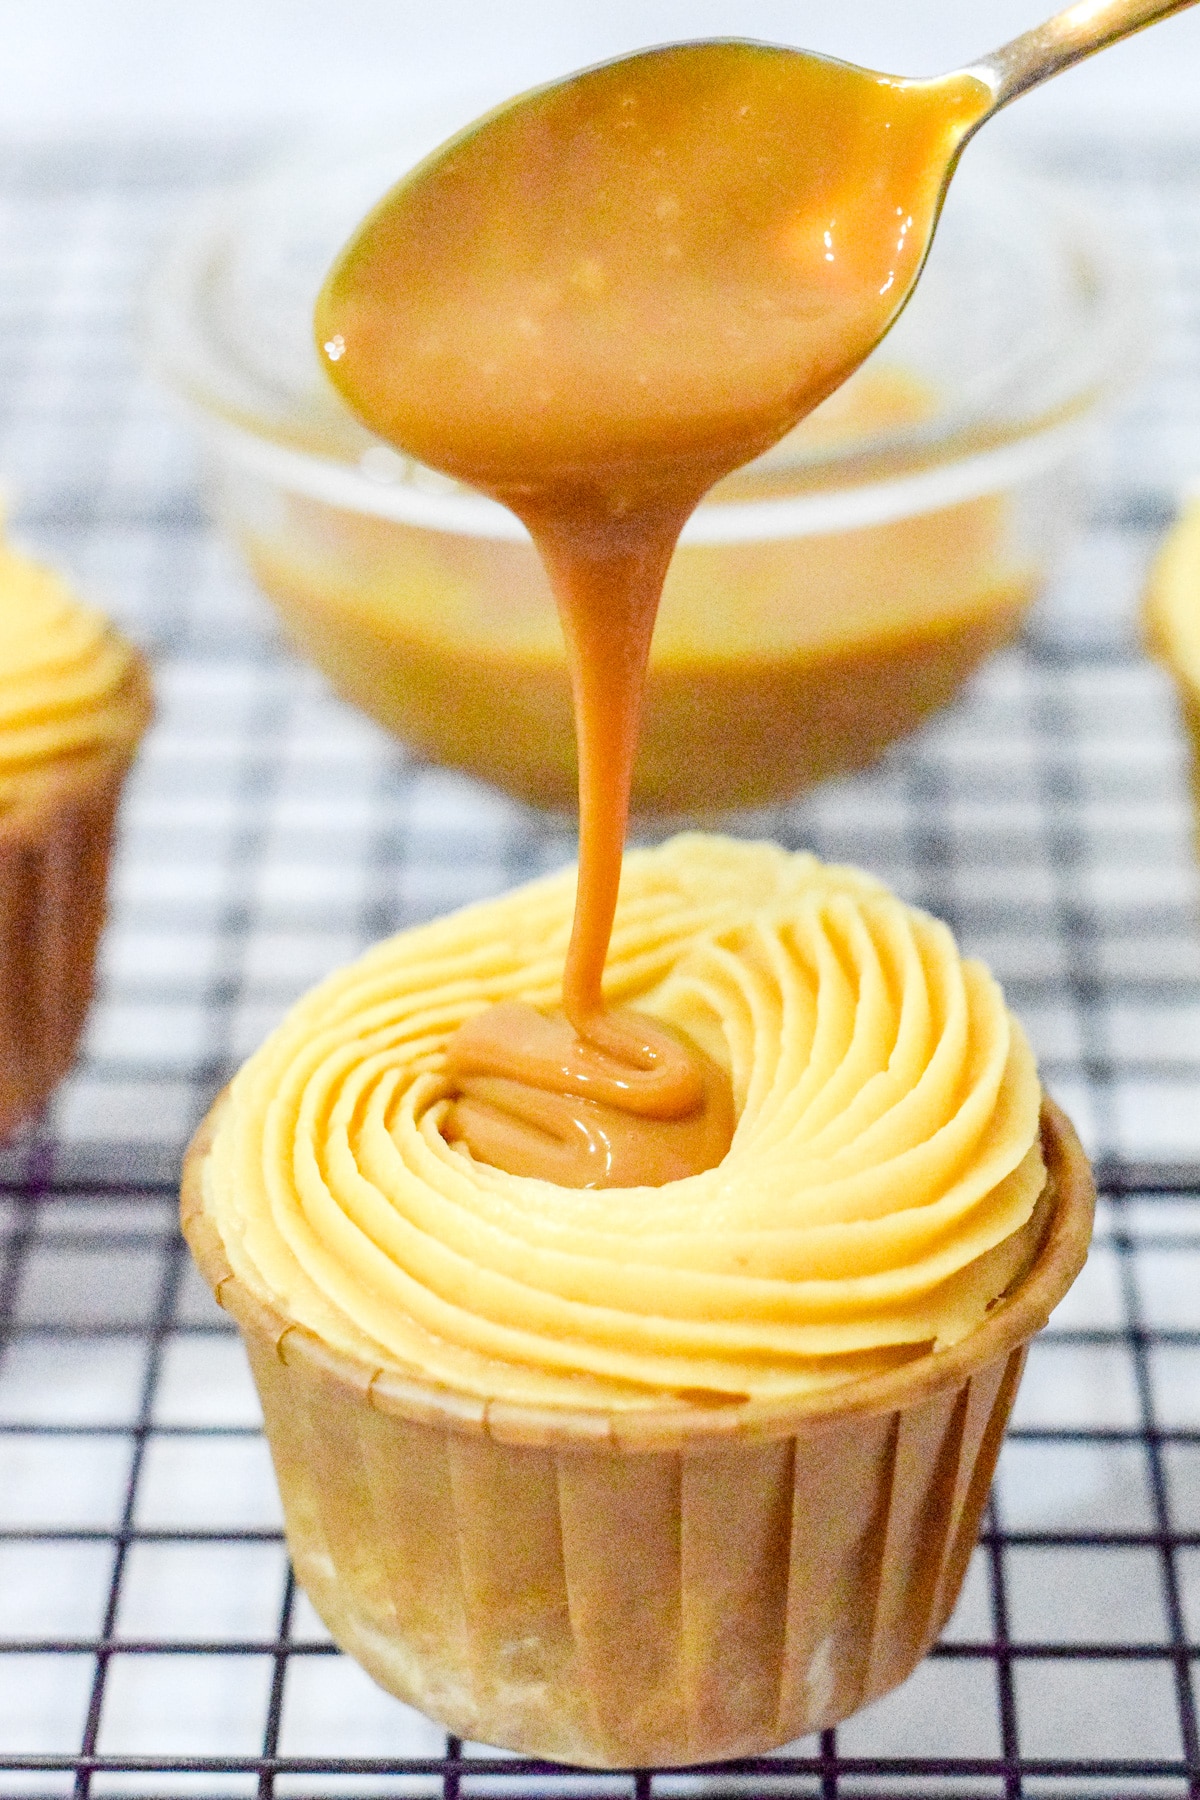 salted caramel whiskey cupcakes with whisky caramel sauce drizzling off a spoon into the cupcake